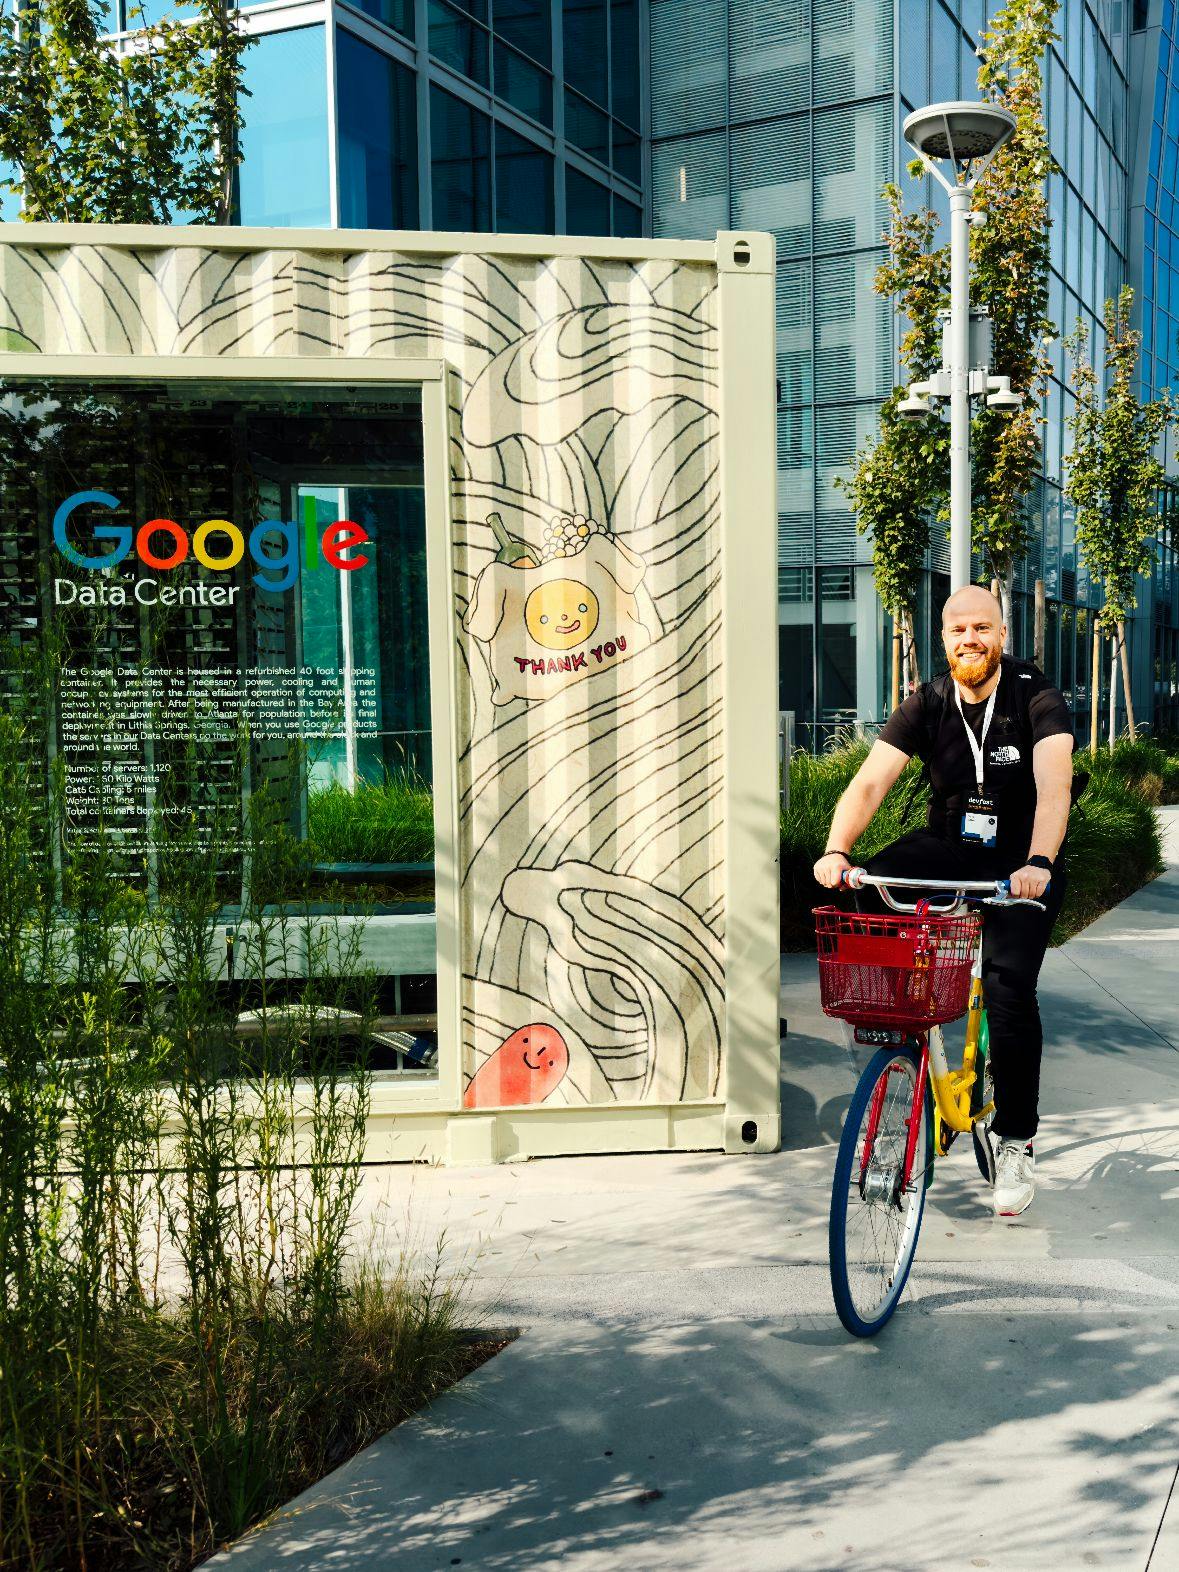 Dave bitter on the Google Campus in San Francisco riding a Google bike